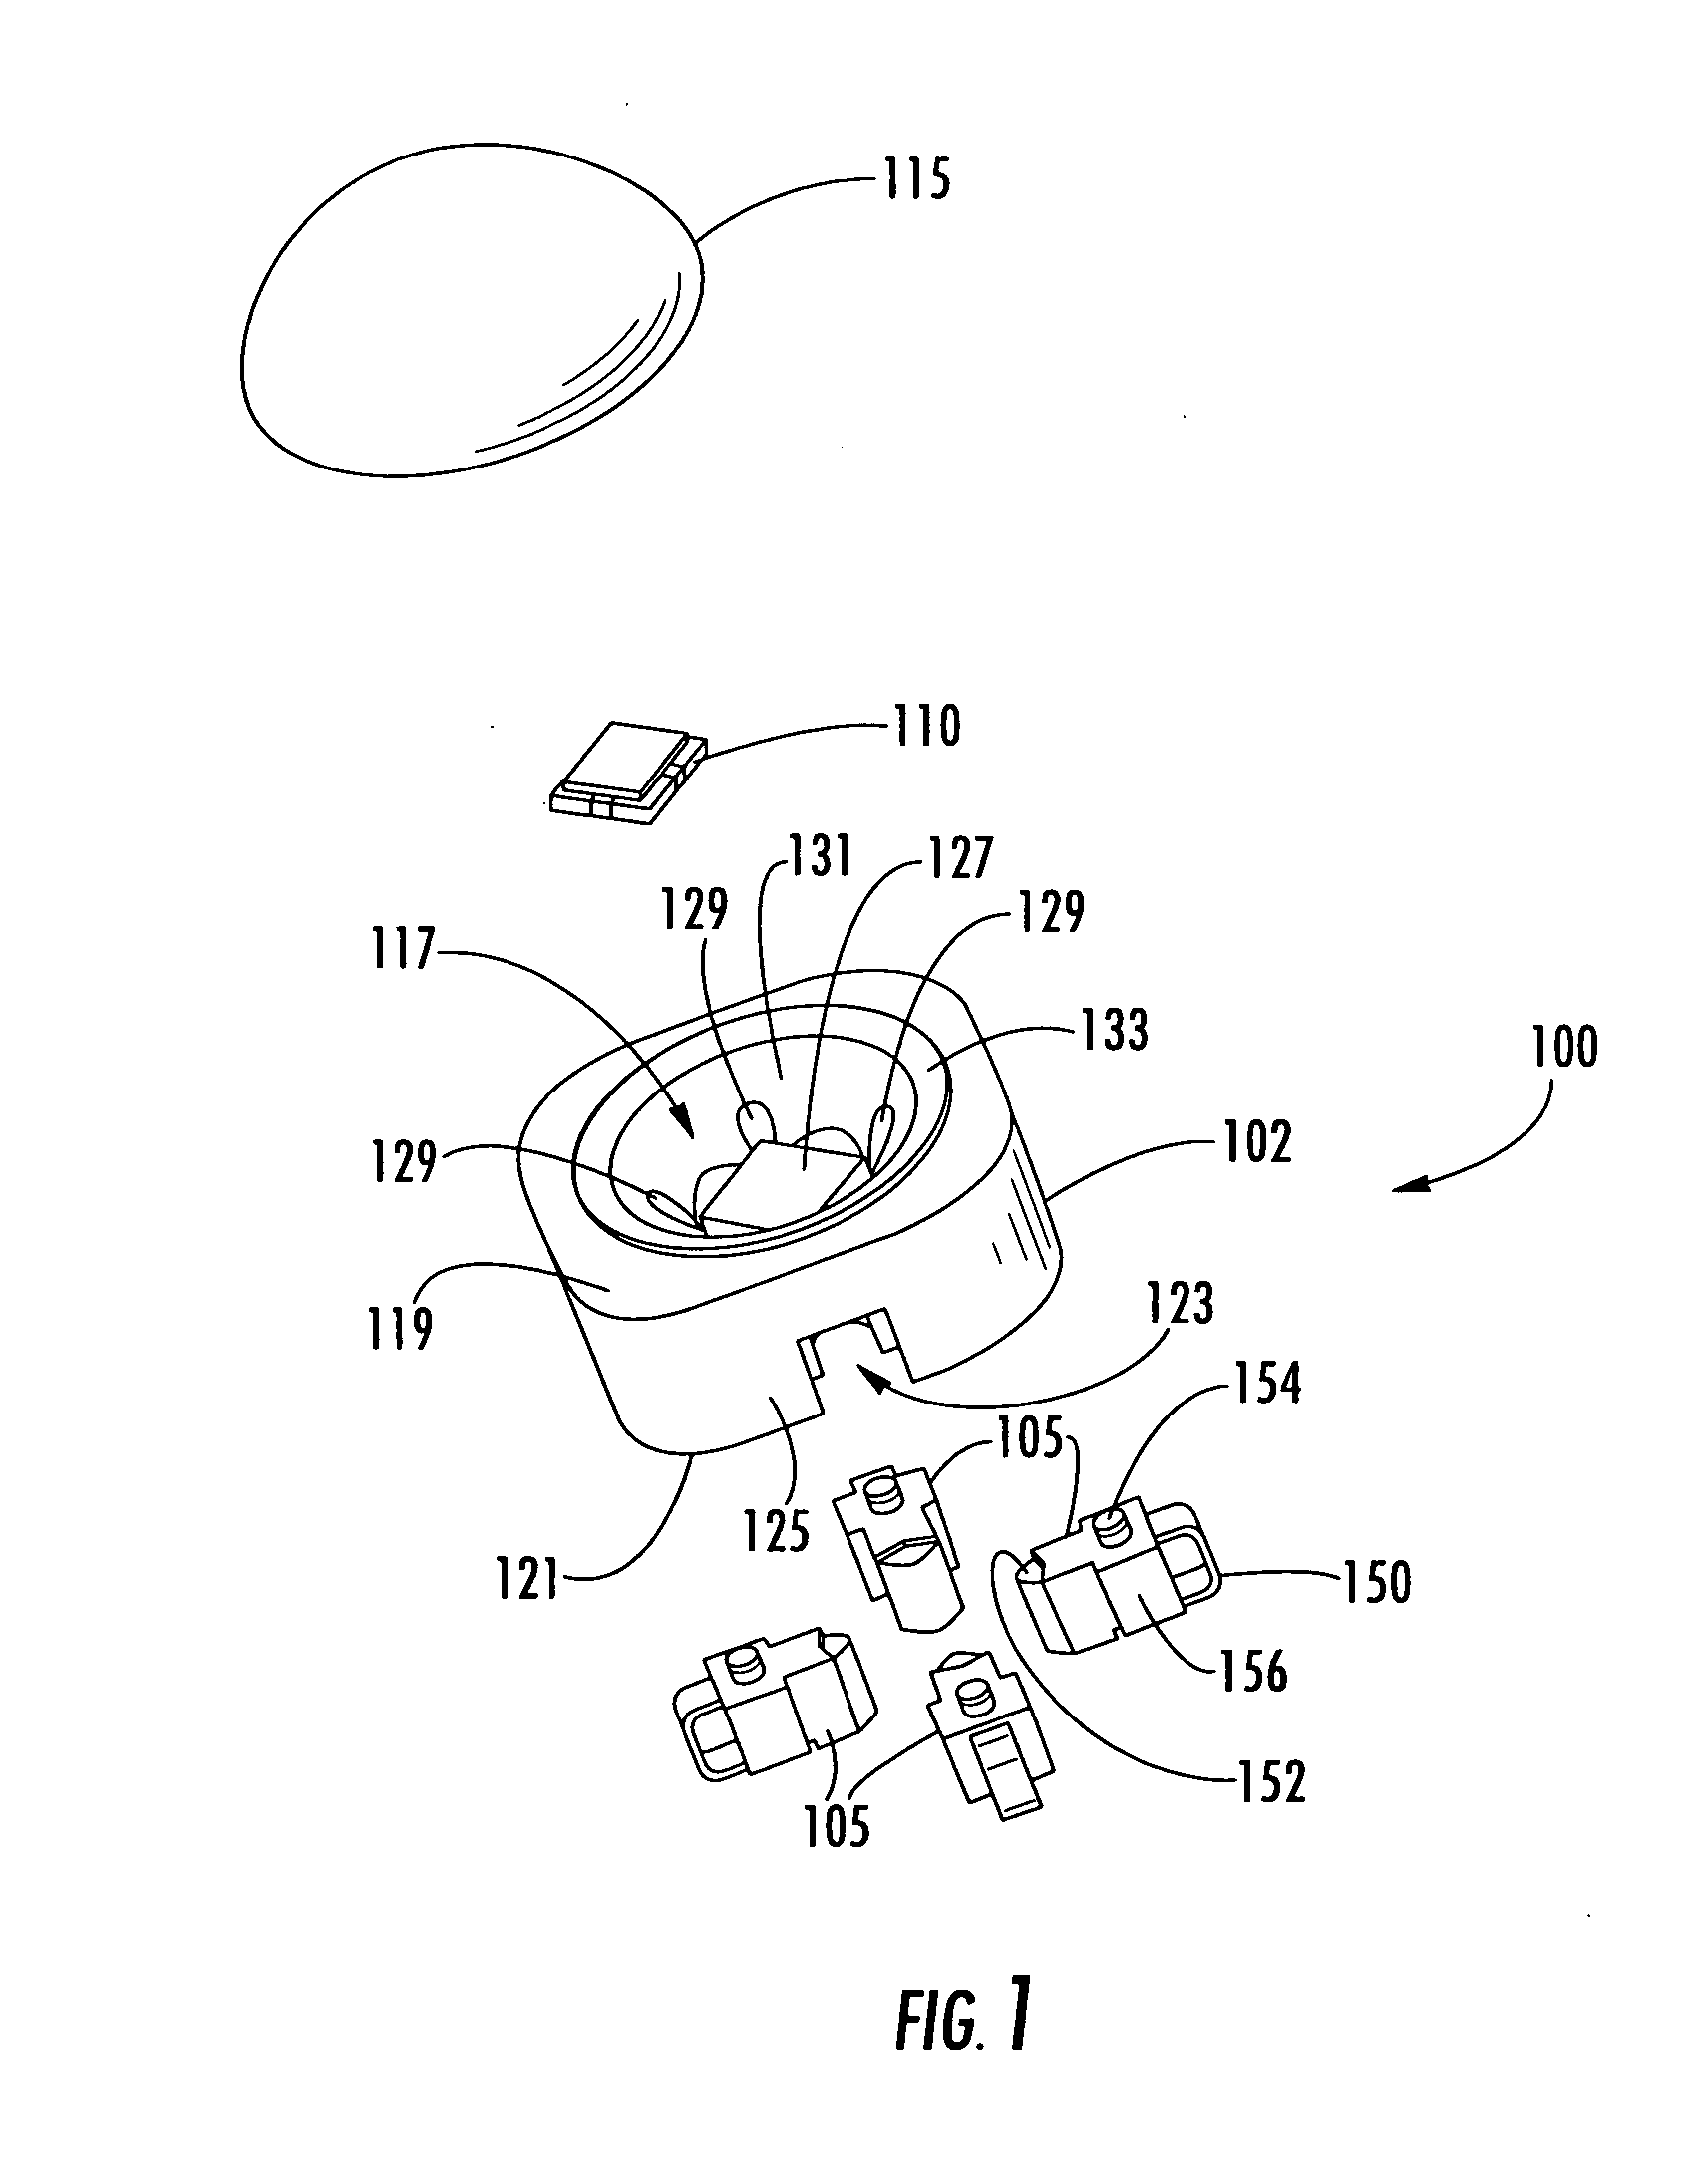 Semiconductor light emitting device mounting substrates including a conductive lead extending therein and methods of packaging same